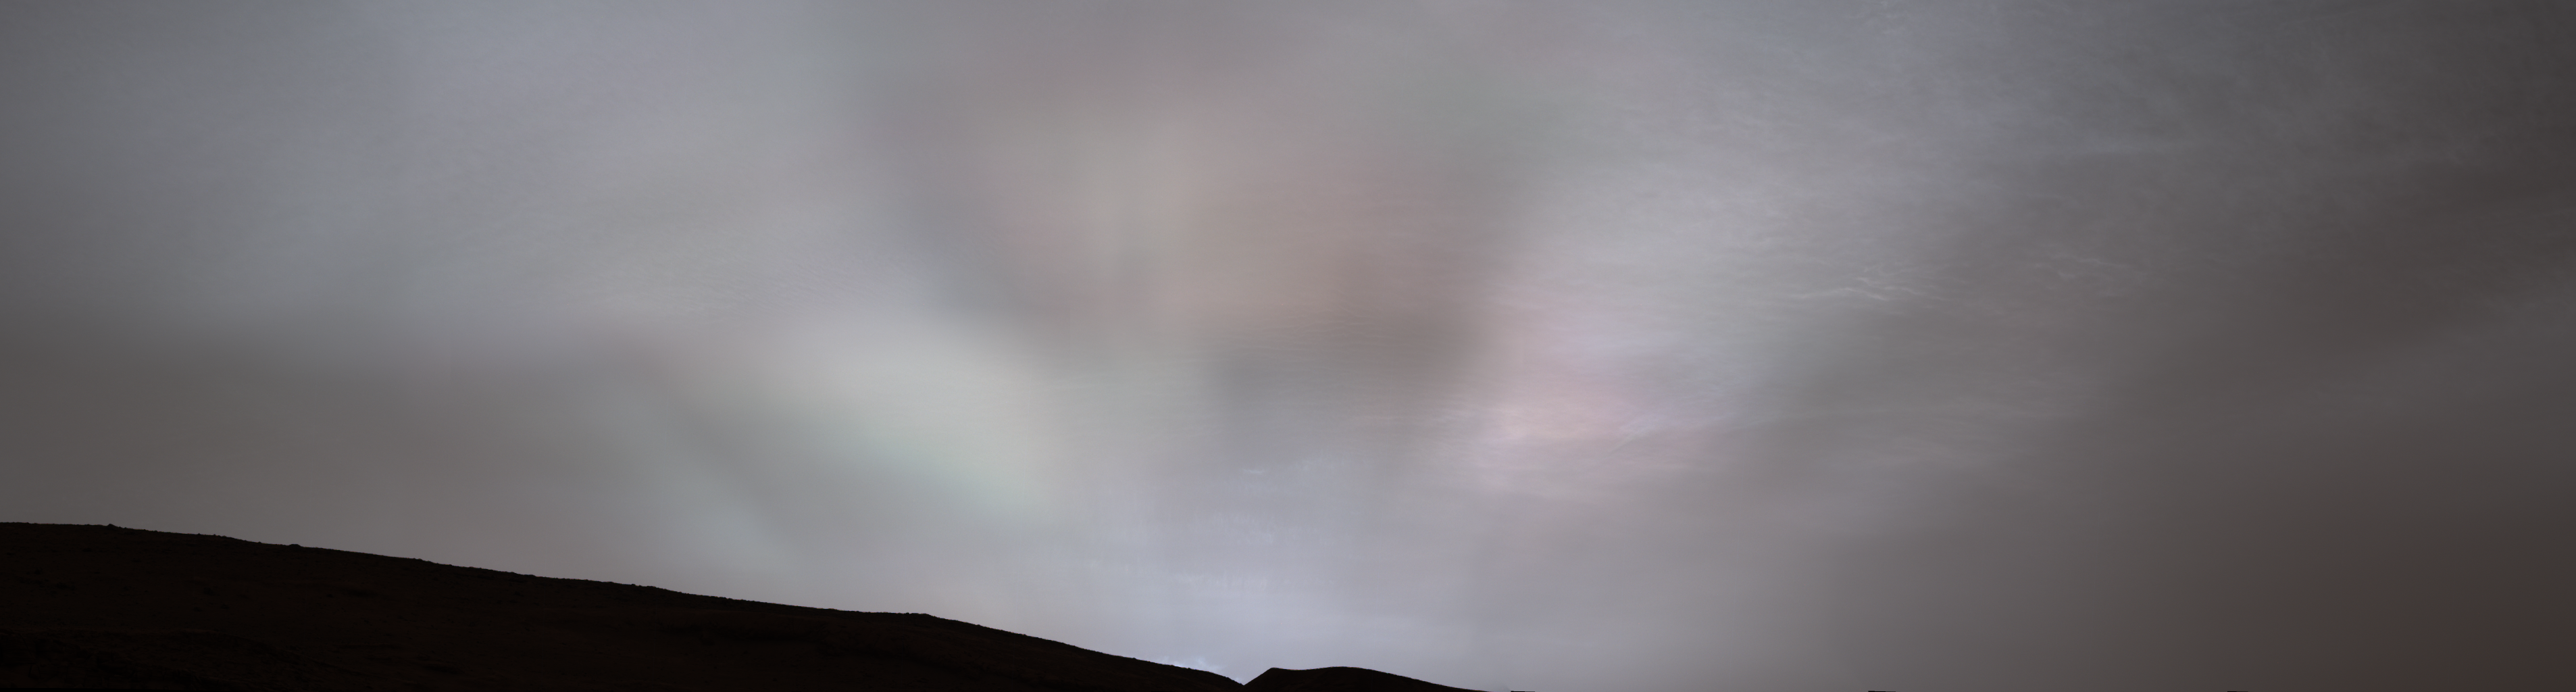 Rays of the sun shining through clouds on Mars during sunset. 